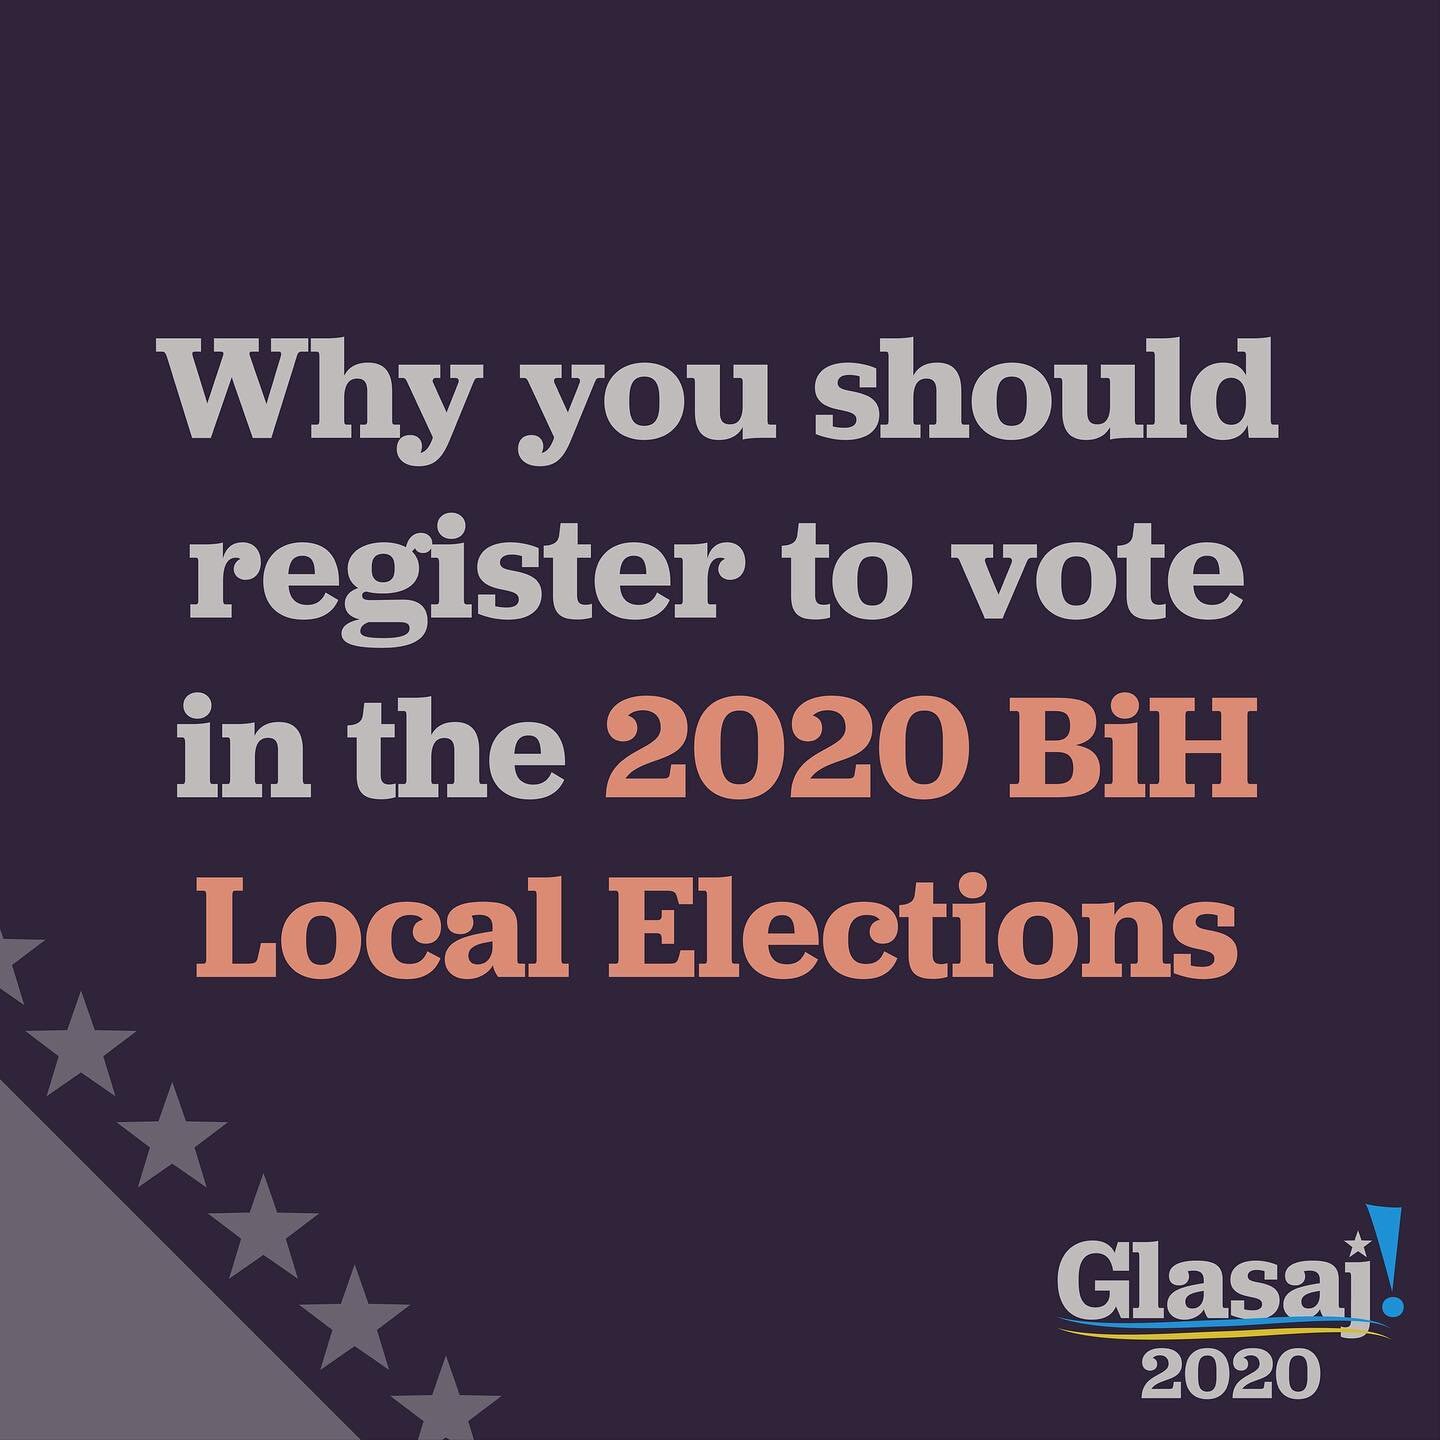 Voting is a fundamental right to making decisions in a democracy. Exercise your right and register to vote today!

glasaj.org #Glasaj2020